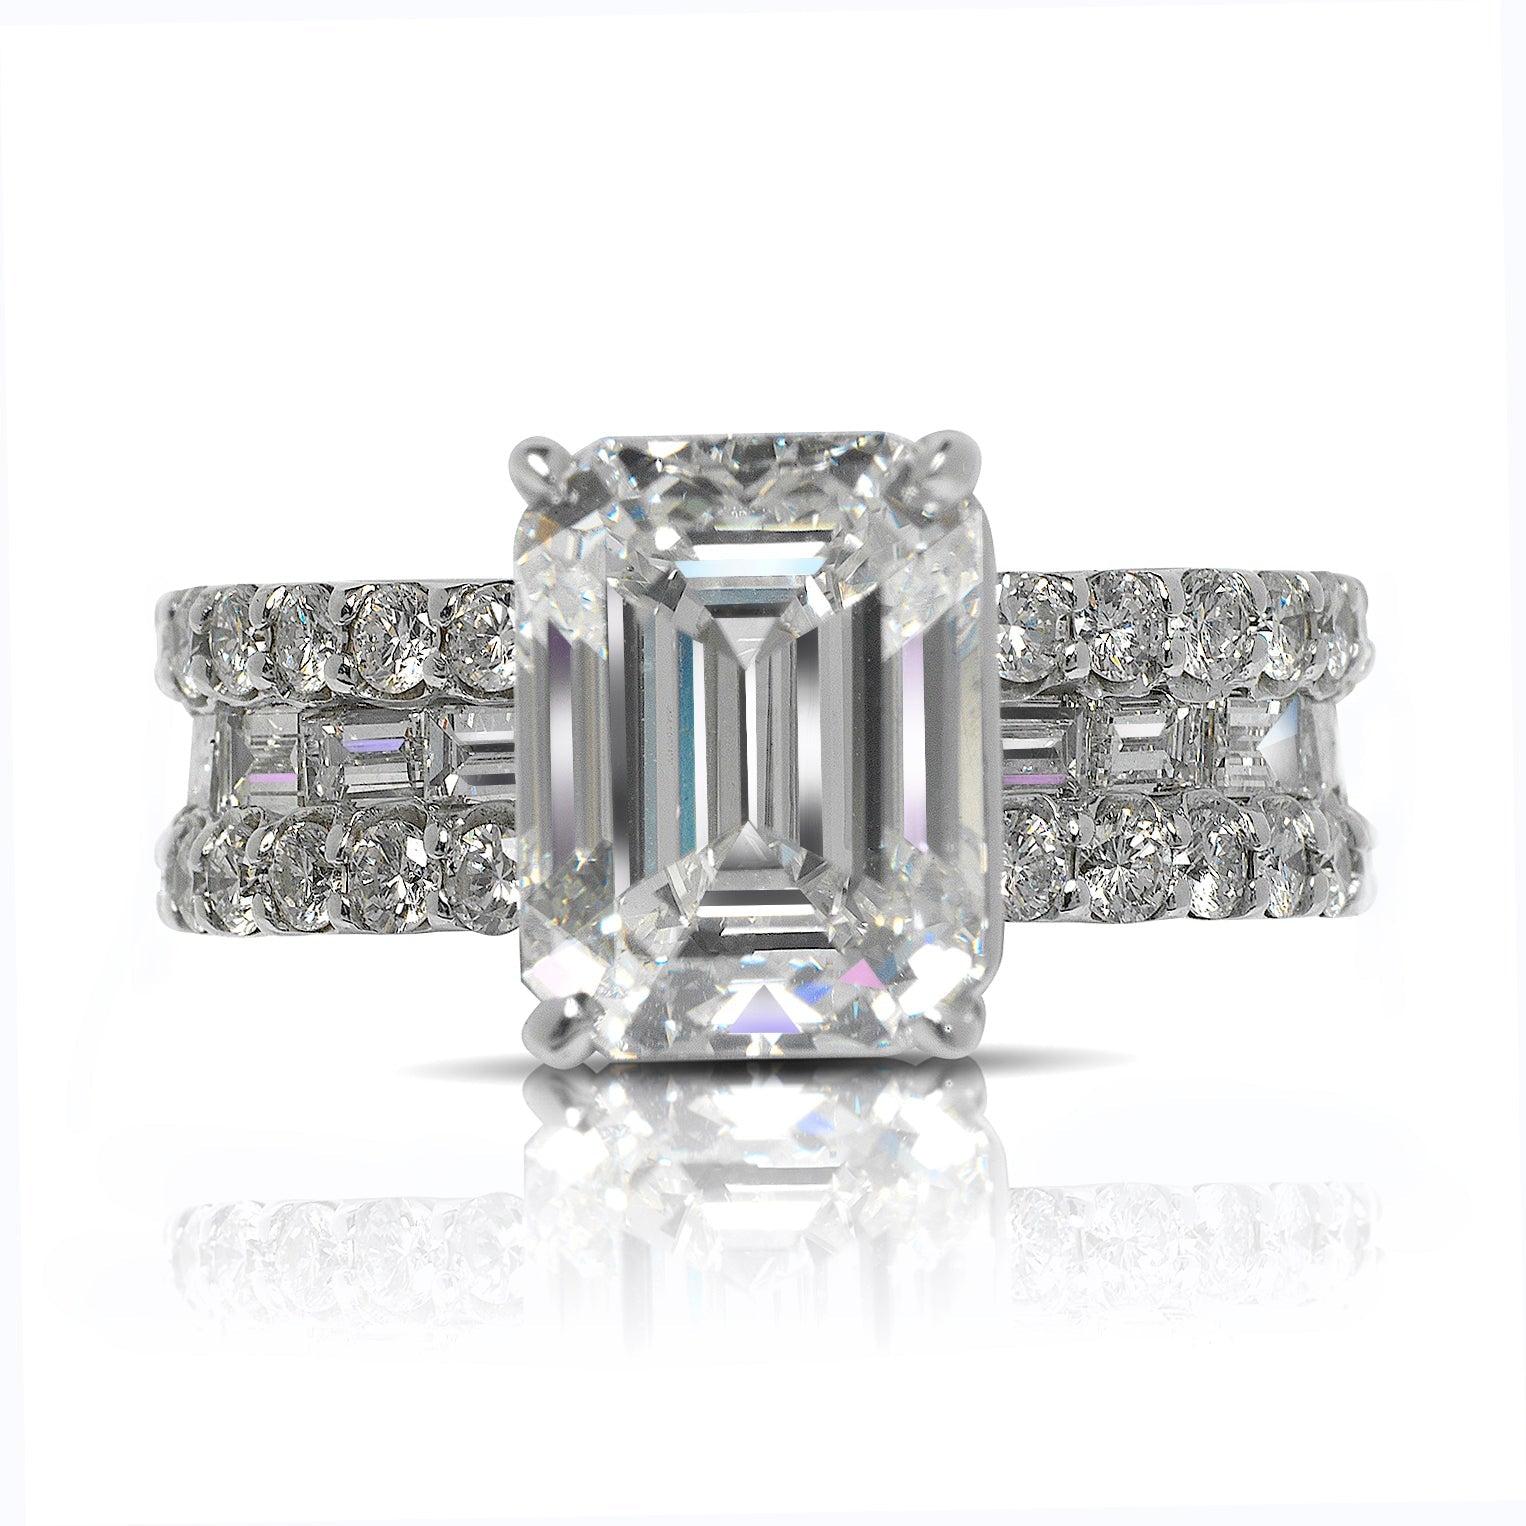 TORA EMERALD CUT DIAMOND ENGAGEMENT RING BAGUETTE CHANNEL SET ETERNITY BAND IN 14K WHITE GOLD  

Center Diamond
Carat Weight: 4.4 Carats
Color :   H*
Clarity:  VVS1
Cut: EMERALD CUT
Measurements: 10.5 x 7.9 x 5.5 mm
* This diamond has been treated